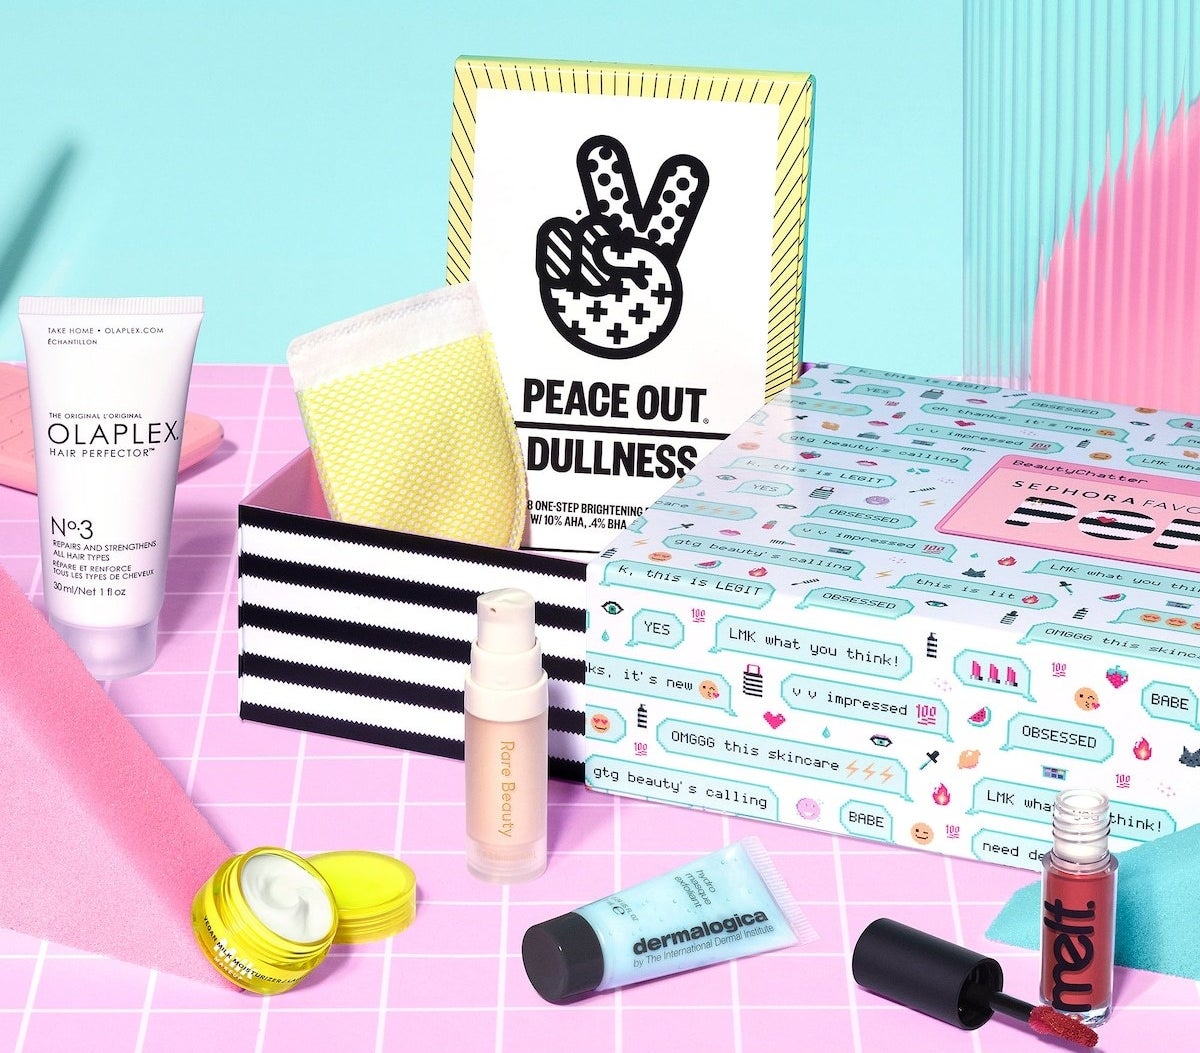 the various products that come in the gift set